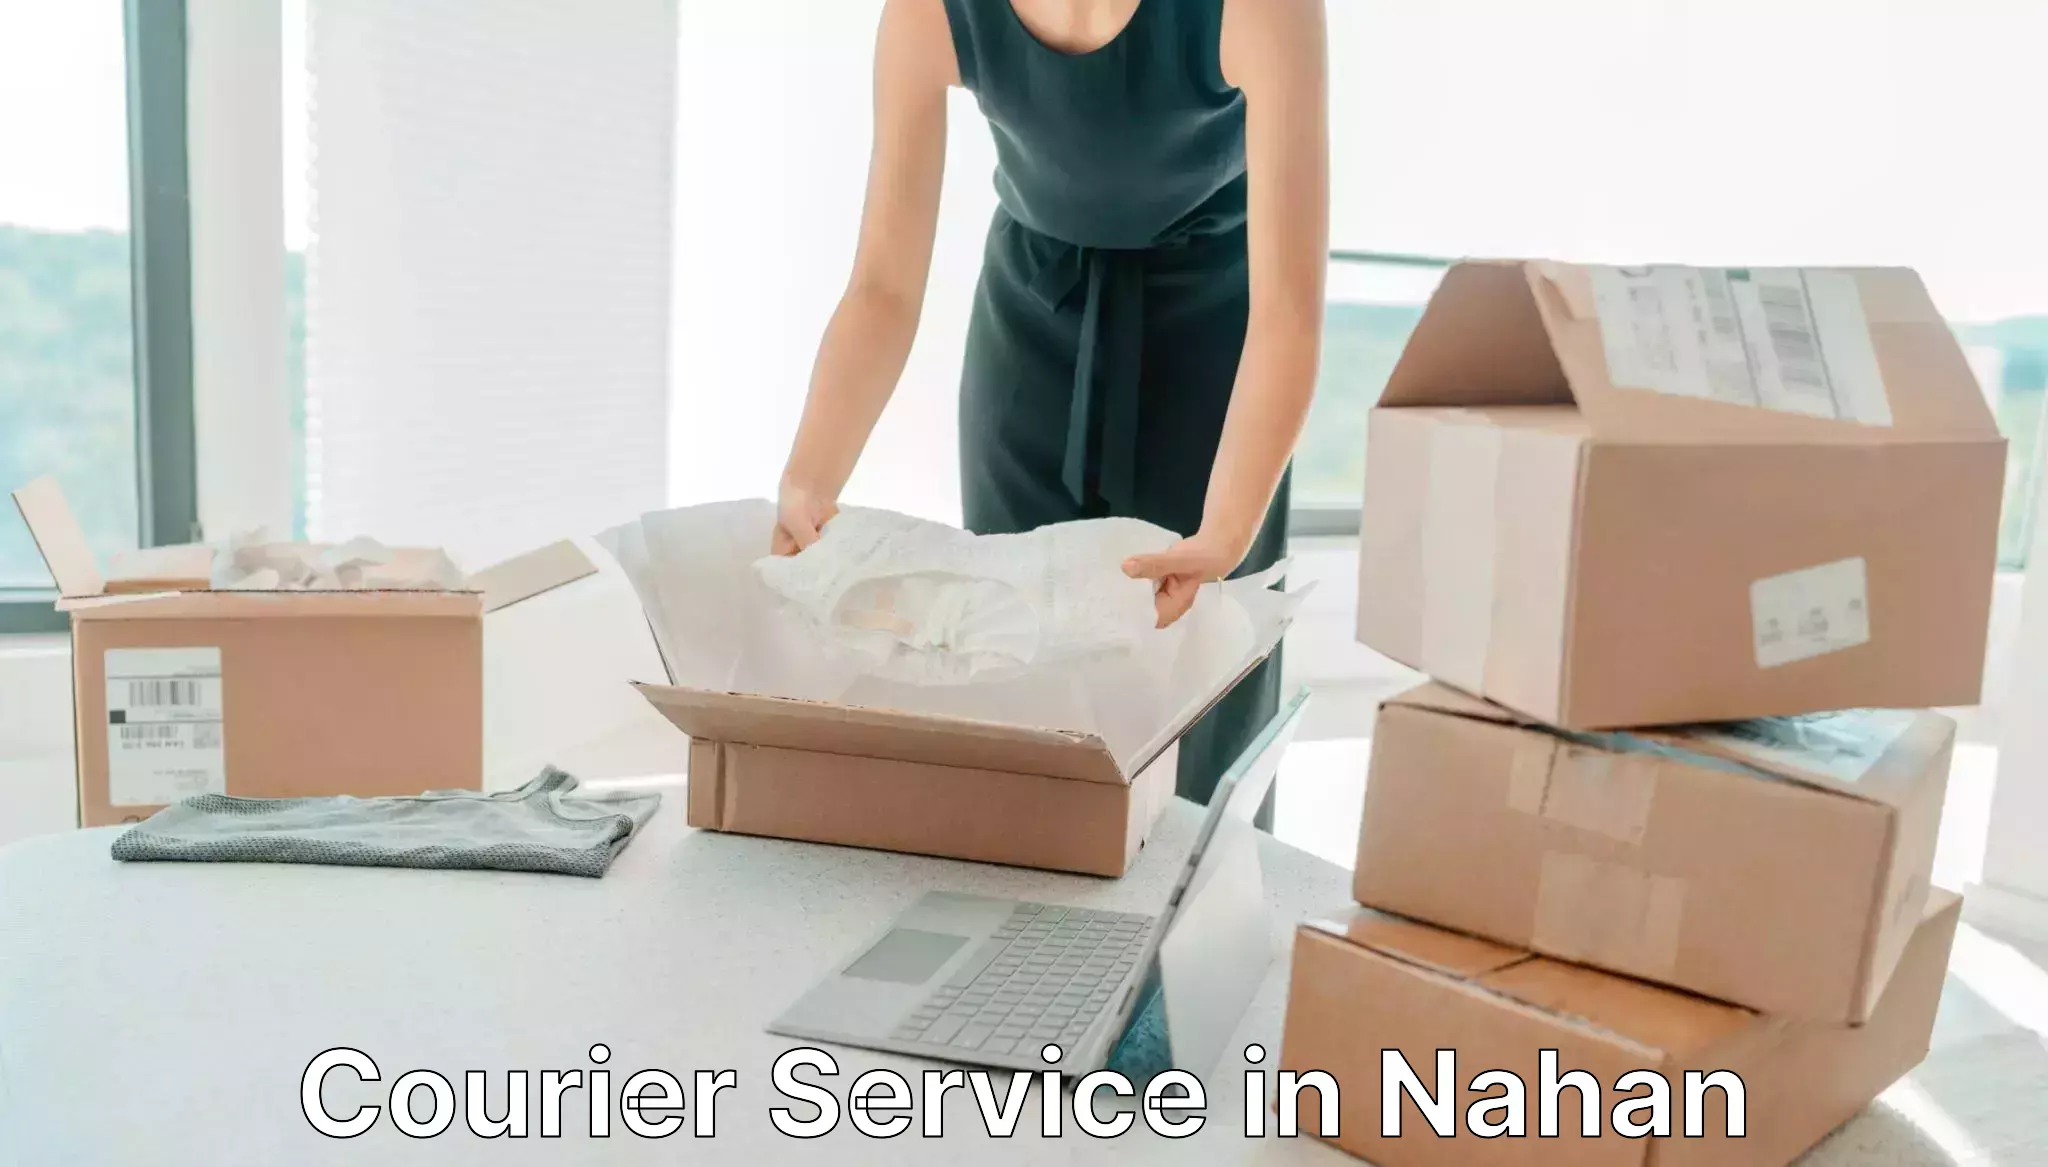 Streamlined delivery processes in Nahan